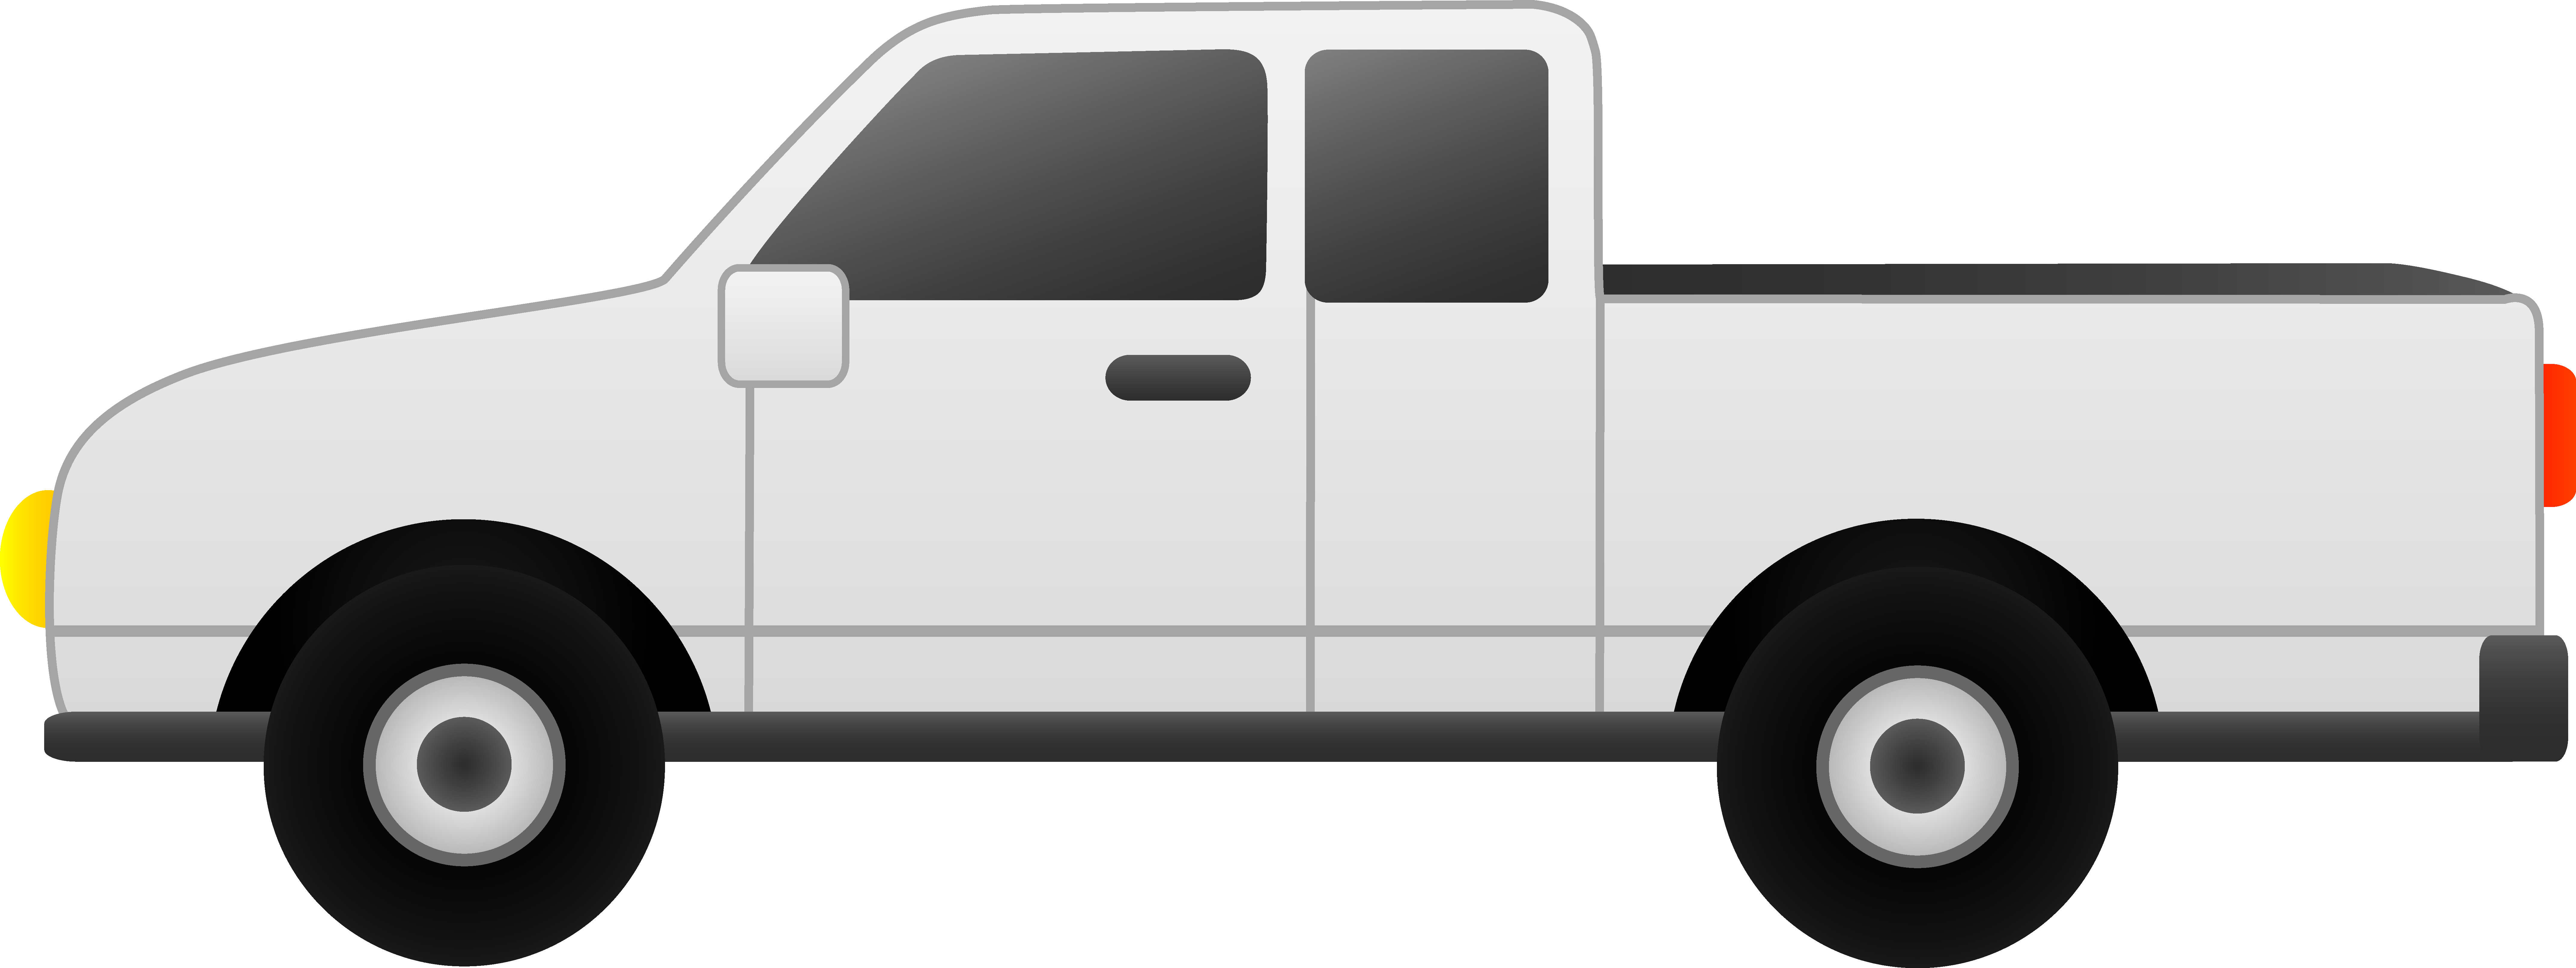 Delivery Truck Clipart Black And White | Clipart library - Free 